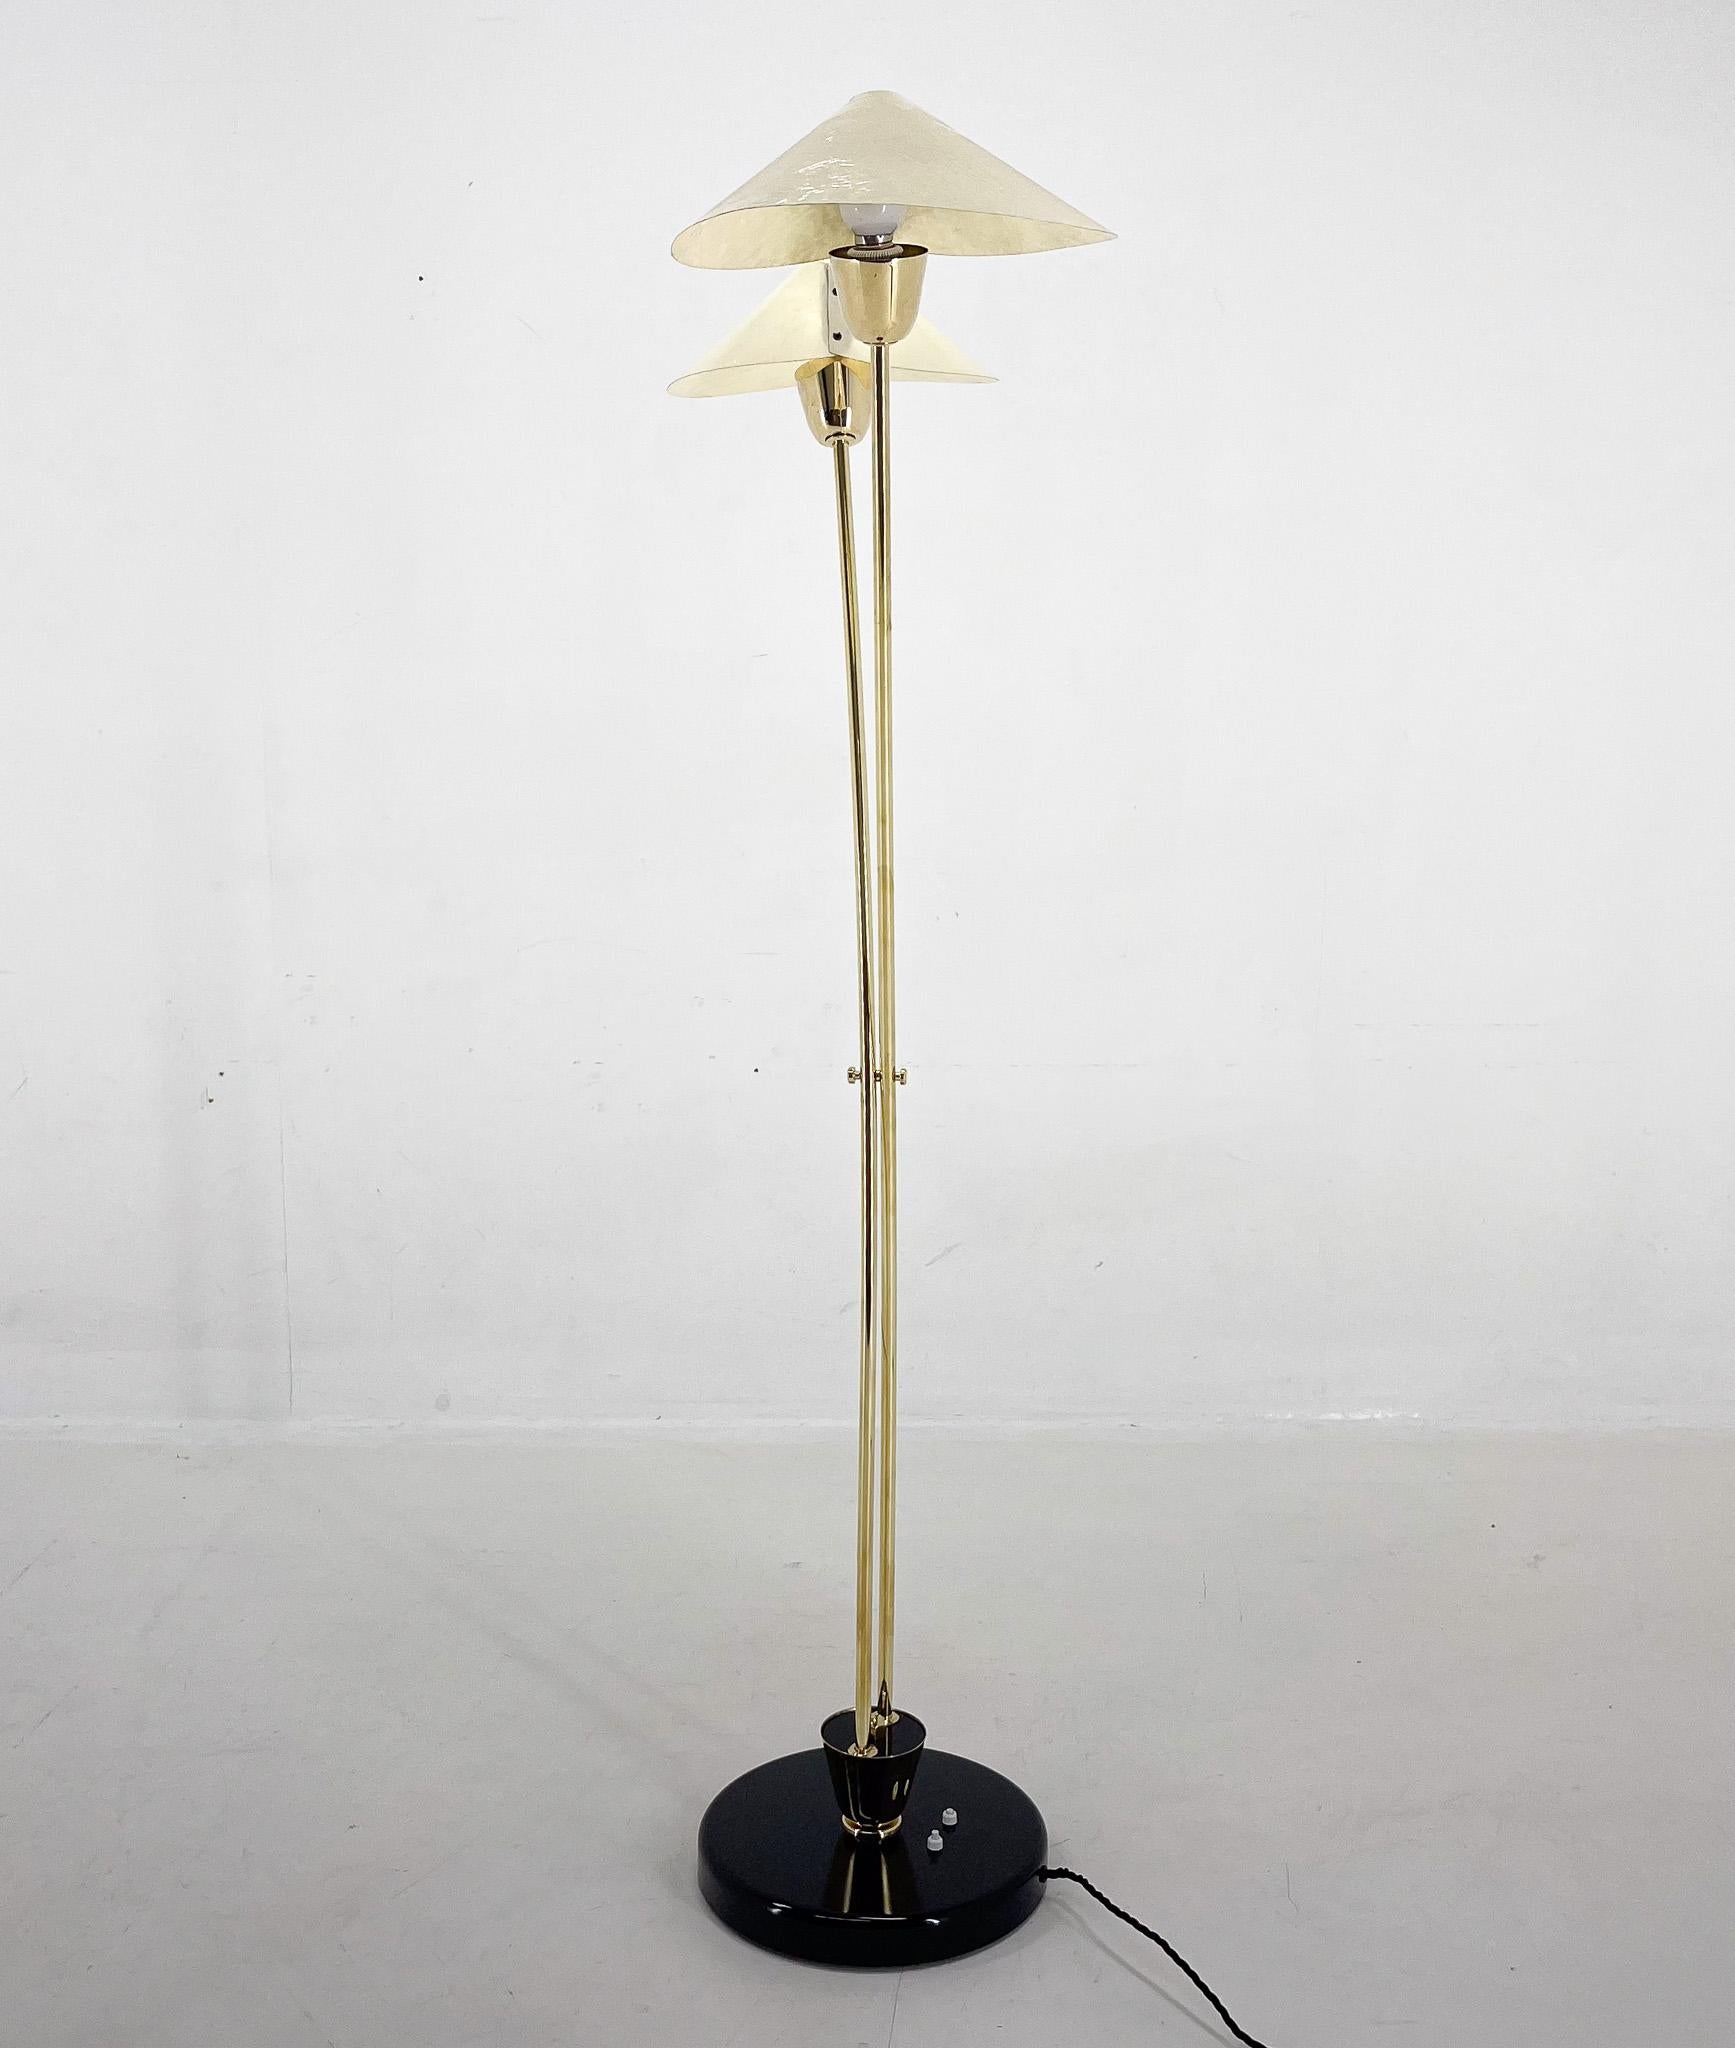 Czech Mid-century Brass Floor Lamp by Napako, 1960s For Sale